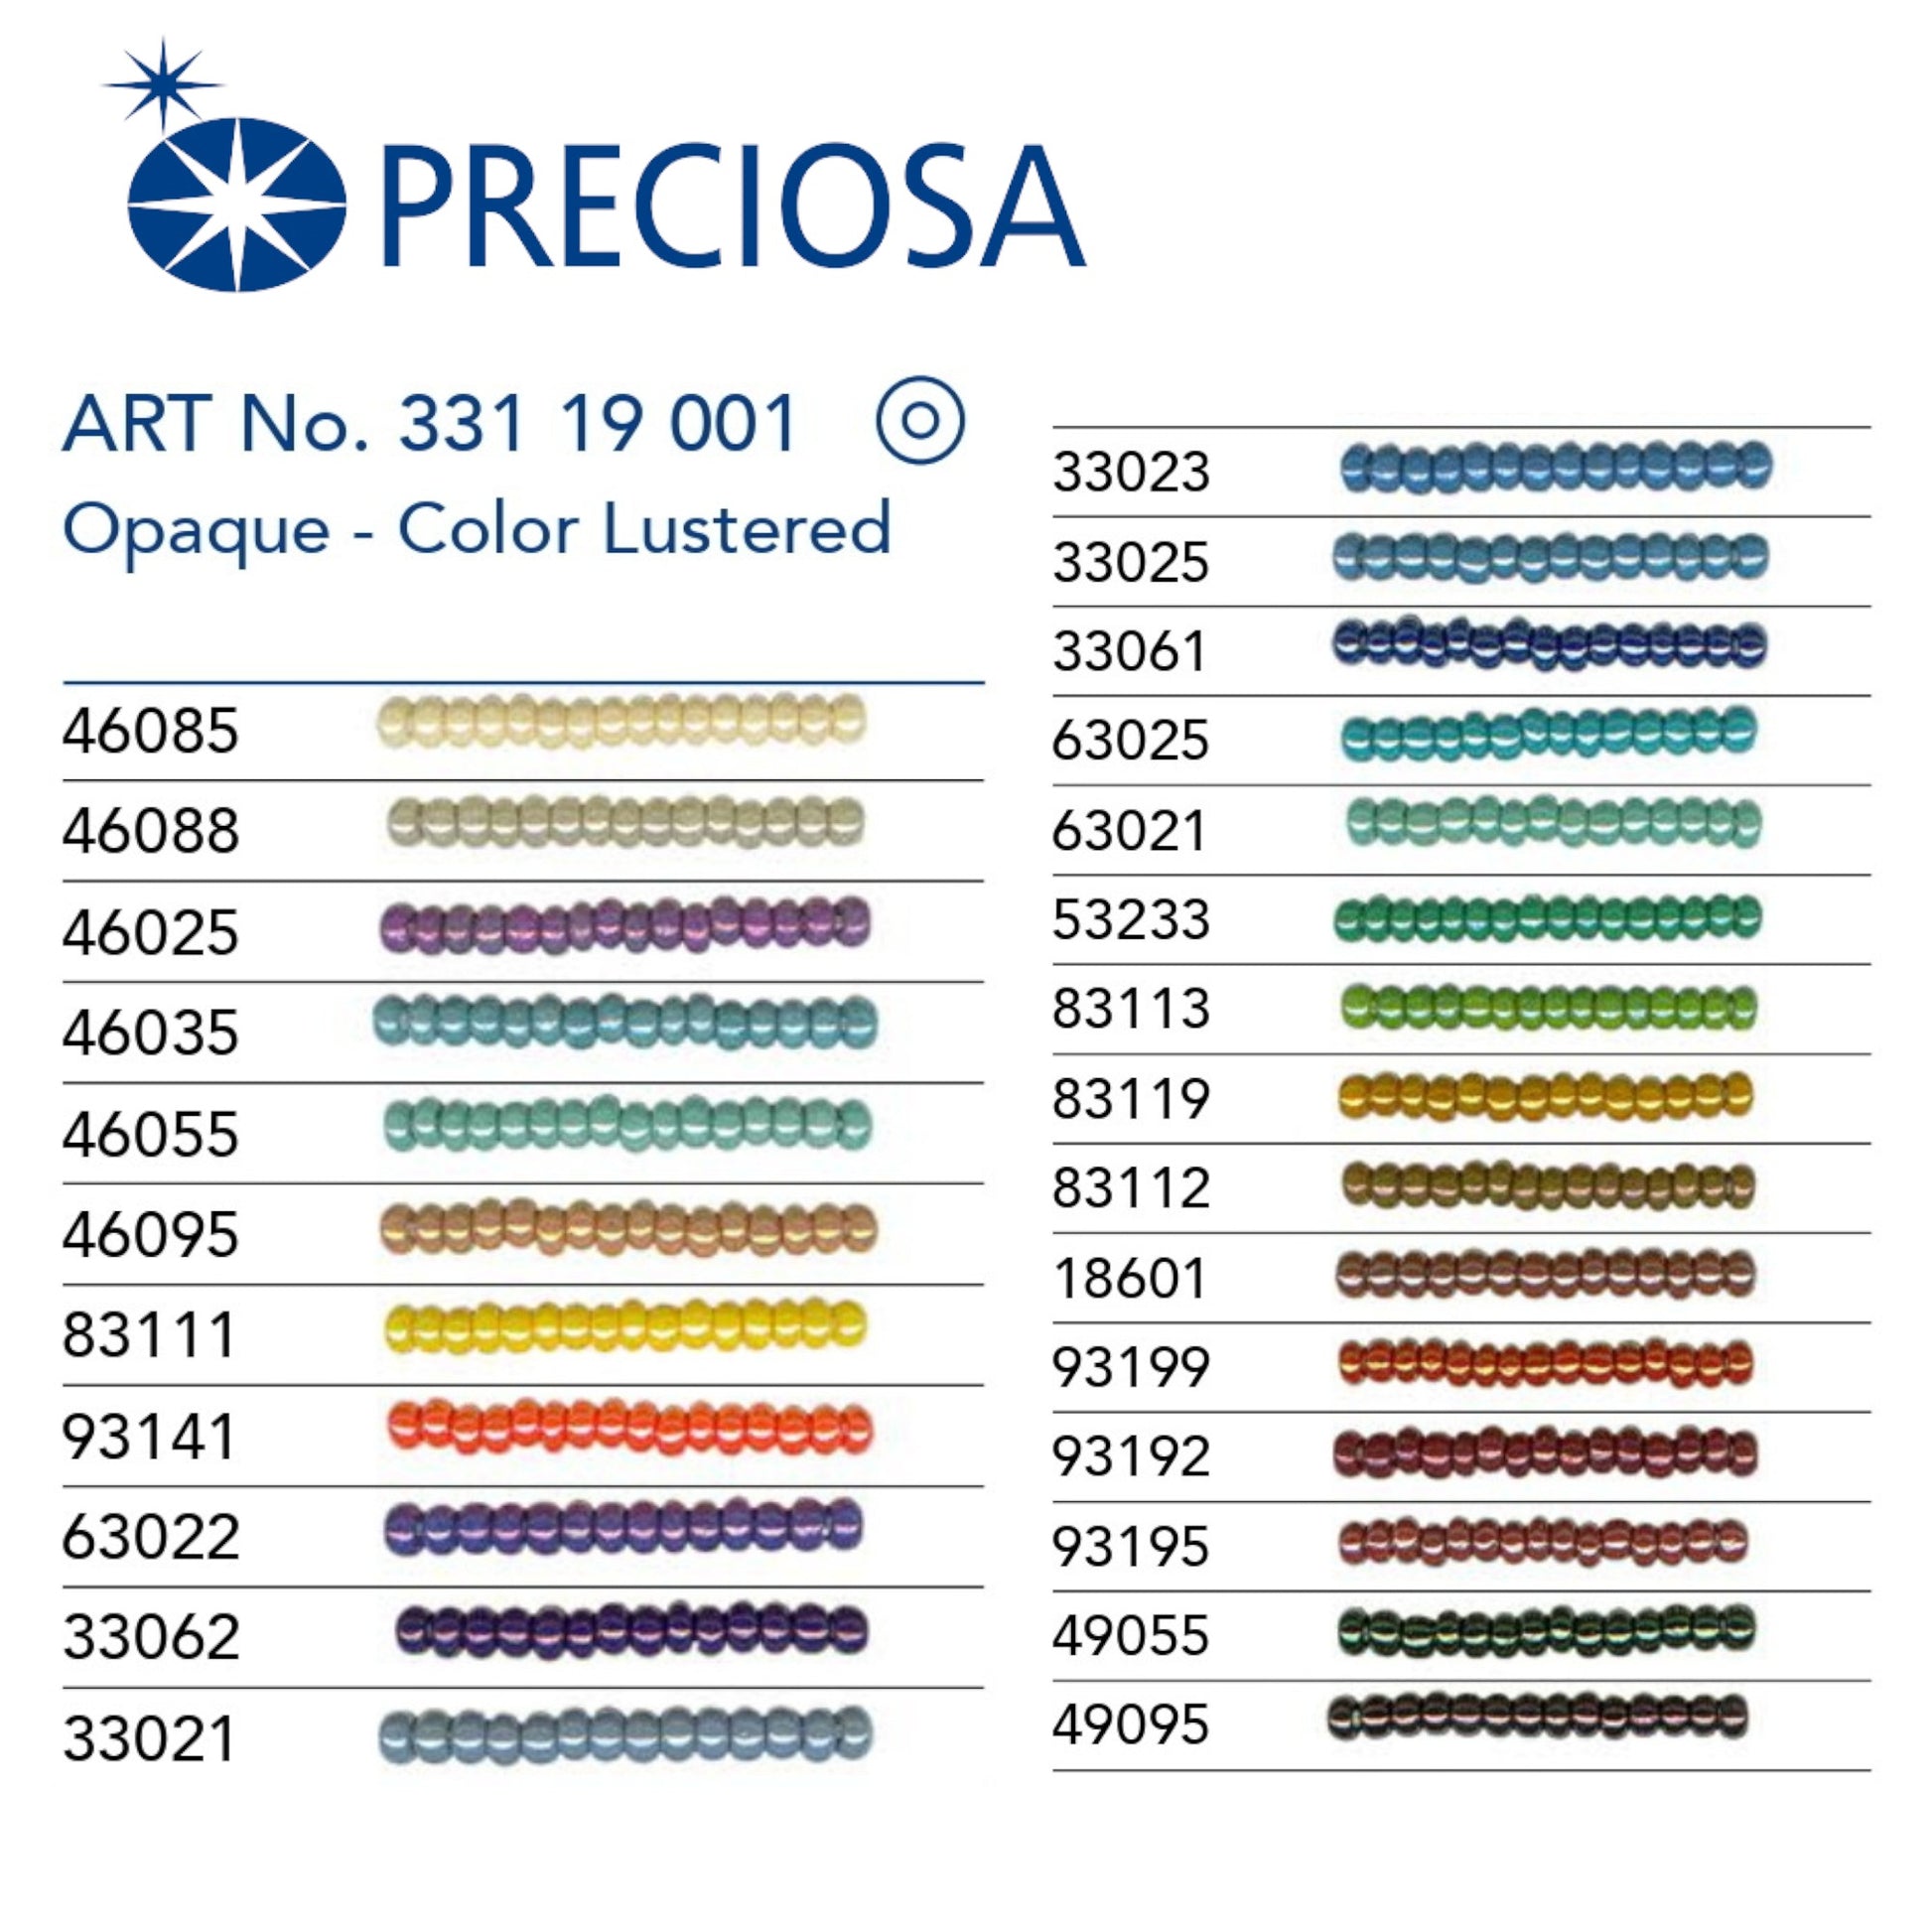 53233 Czech Seed Beads Preciosa Rocailes Opaque - Color Lustered - VadymShop